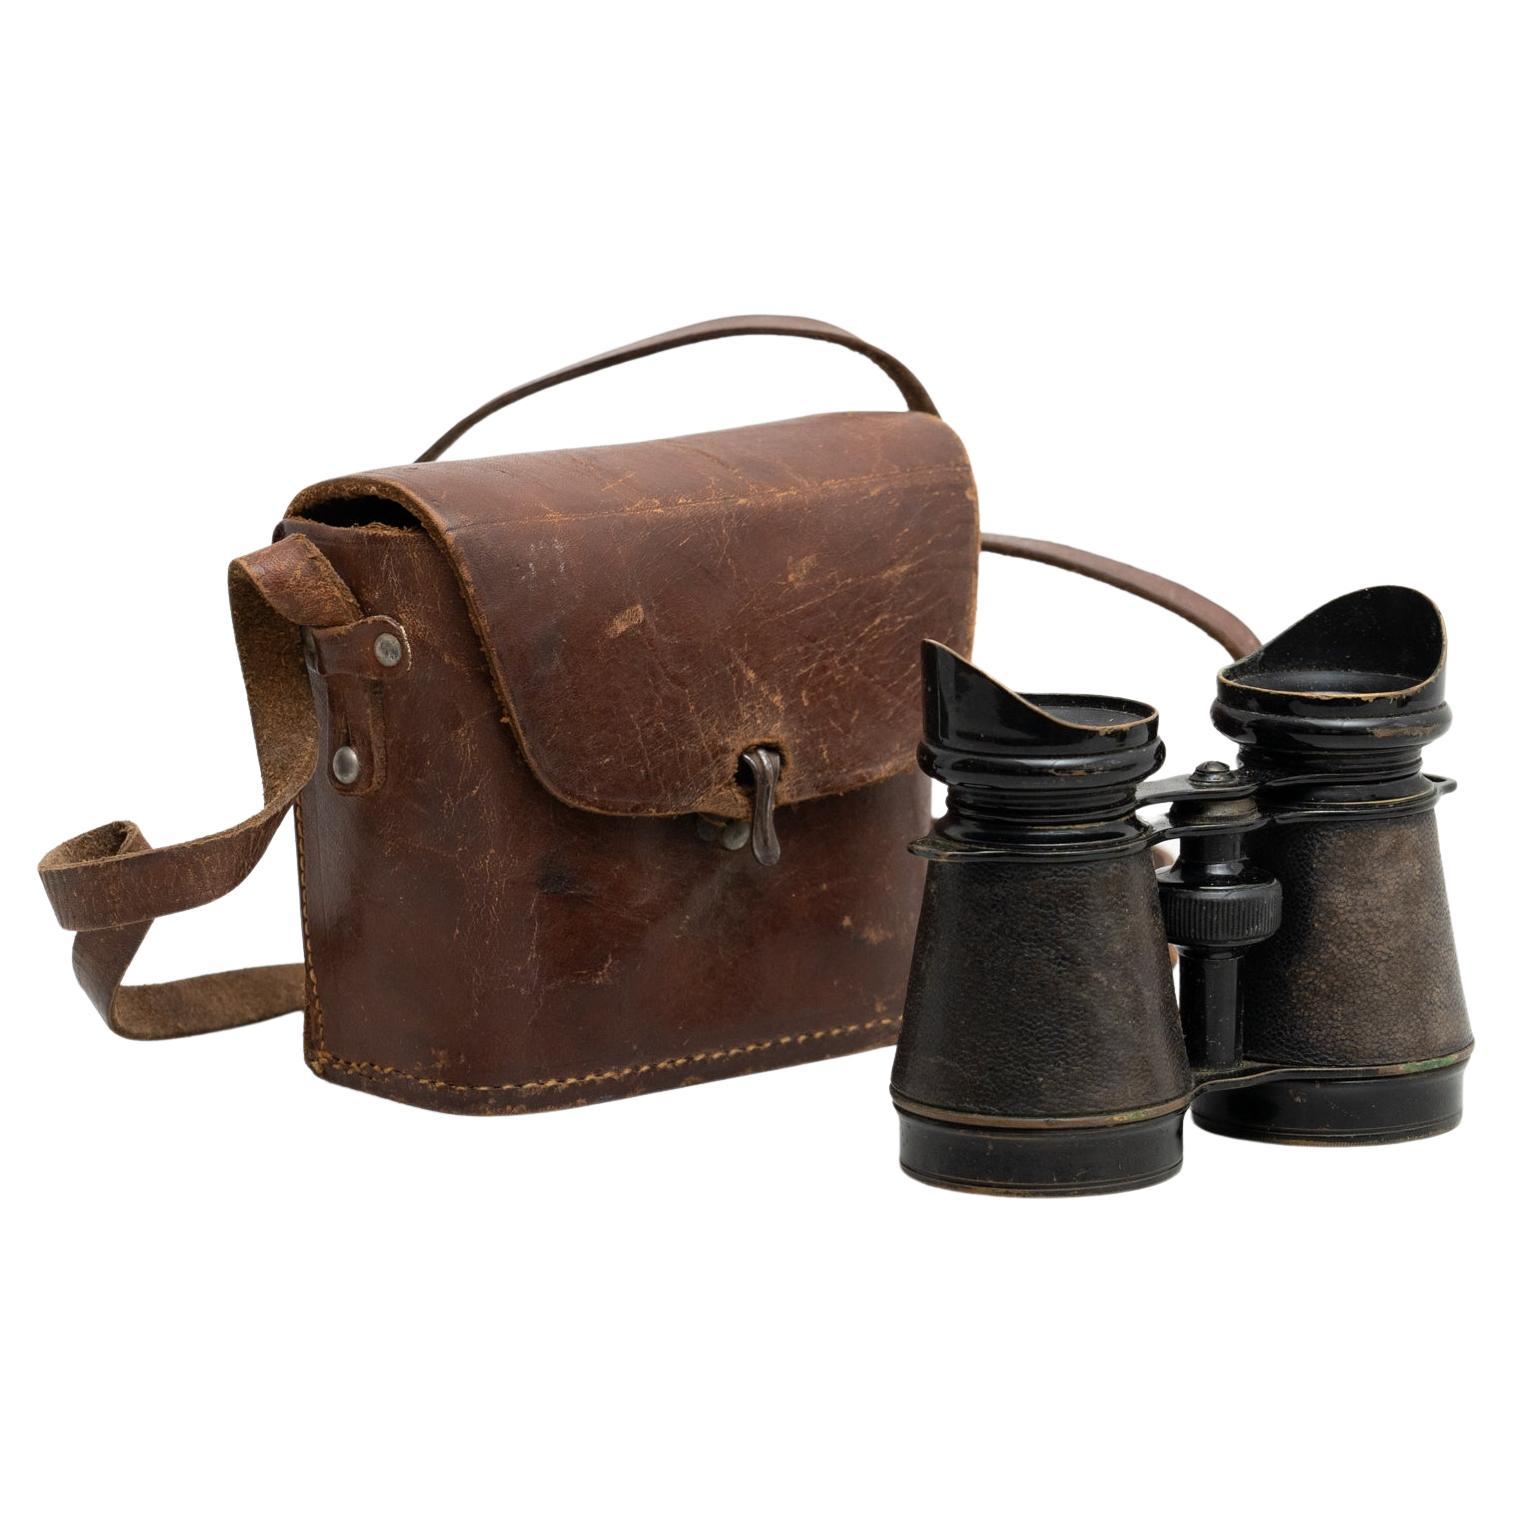 Antique Vintage Binoculars on a Leather Case, circa 1950 For Sale